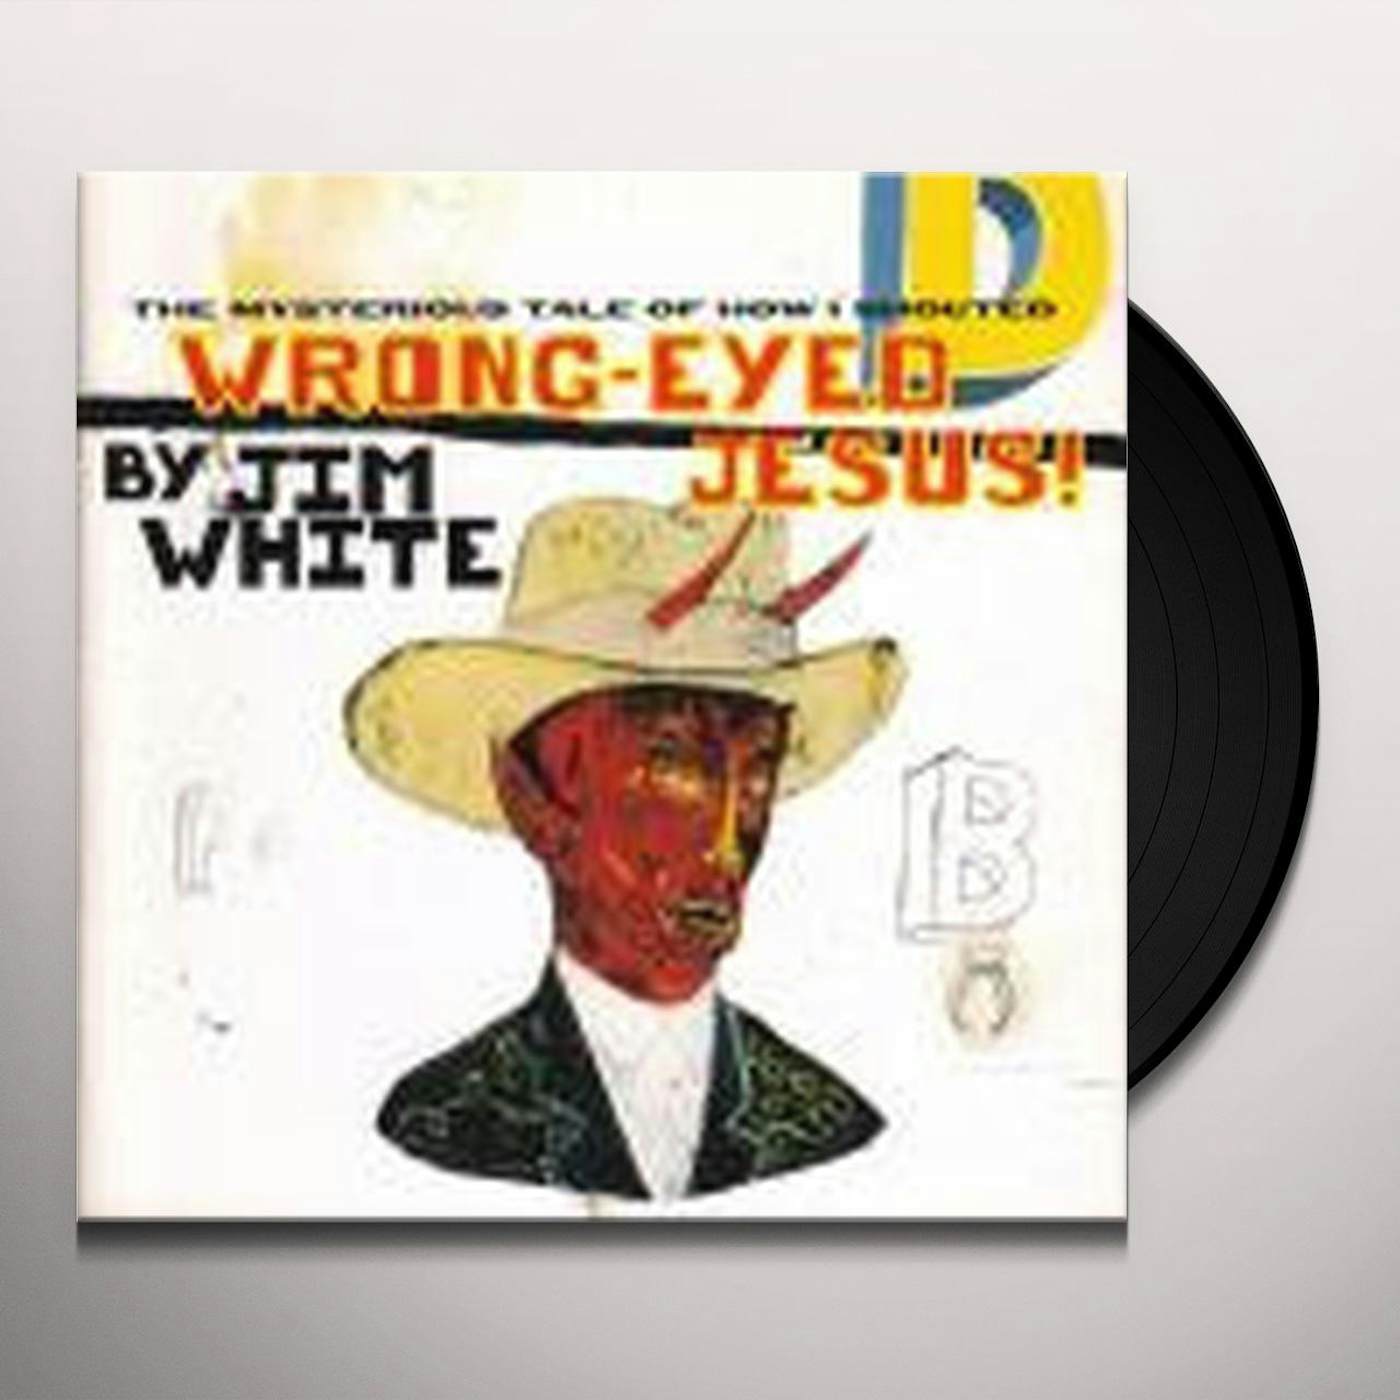 Jim White MYSTERIOUS TALE OF HOW I SHOUTED WRONG-EYED JESUS! Vinyl Record